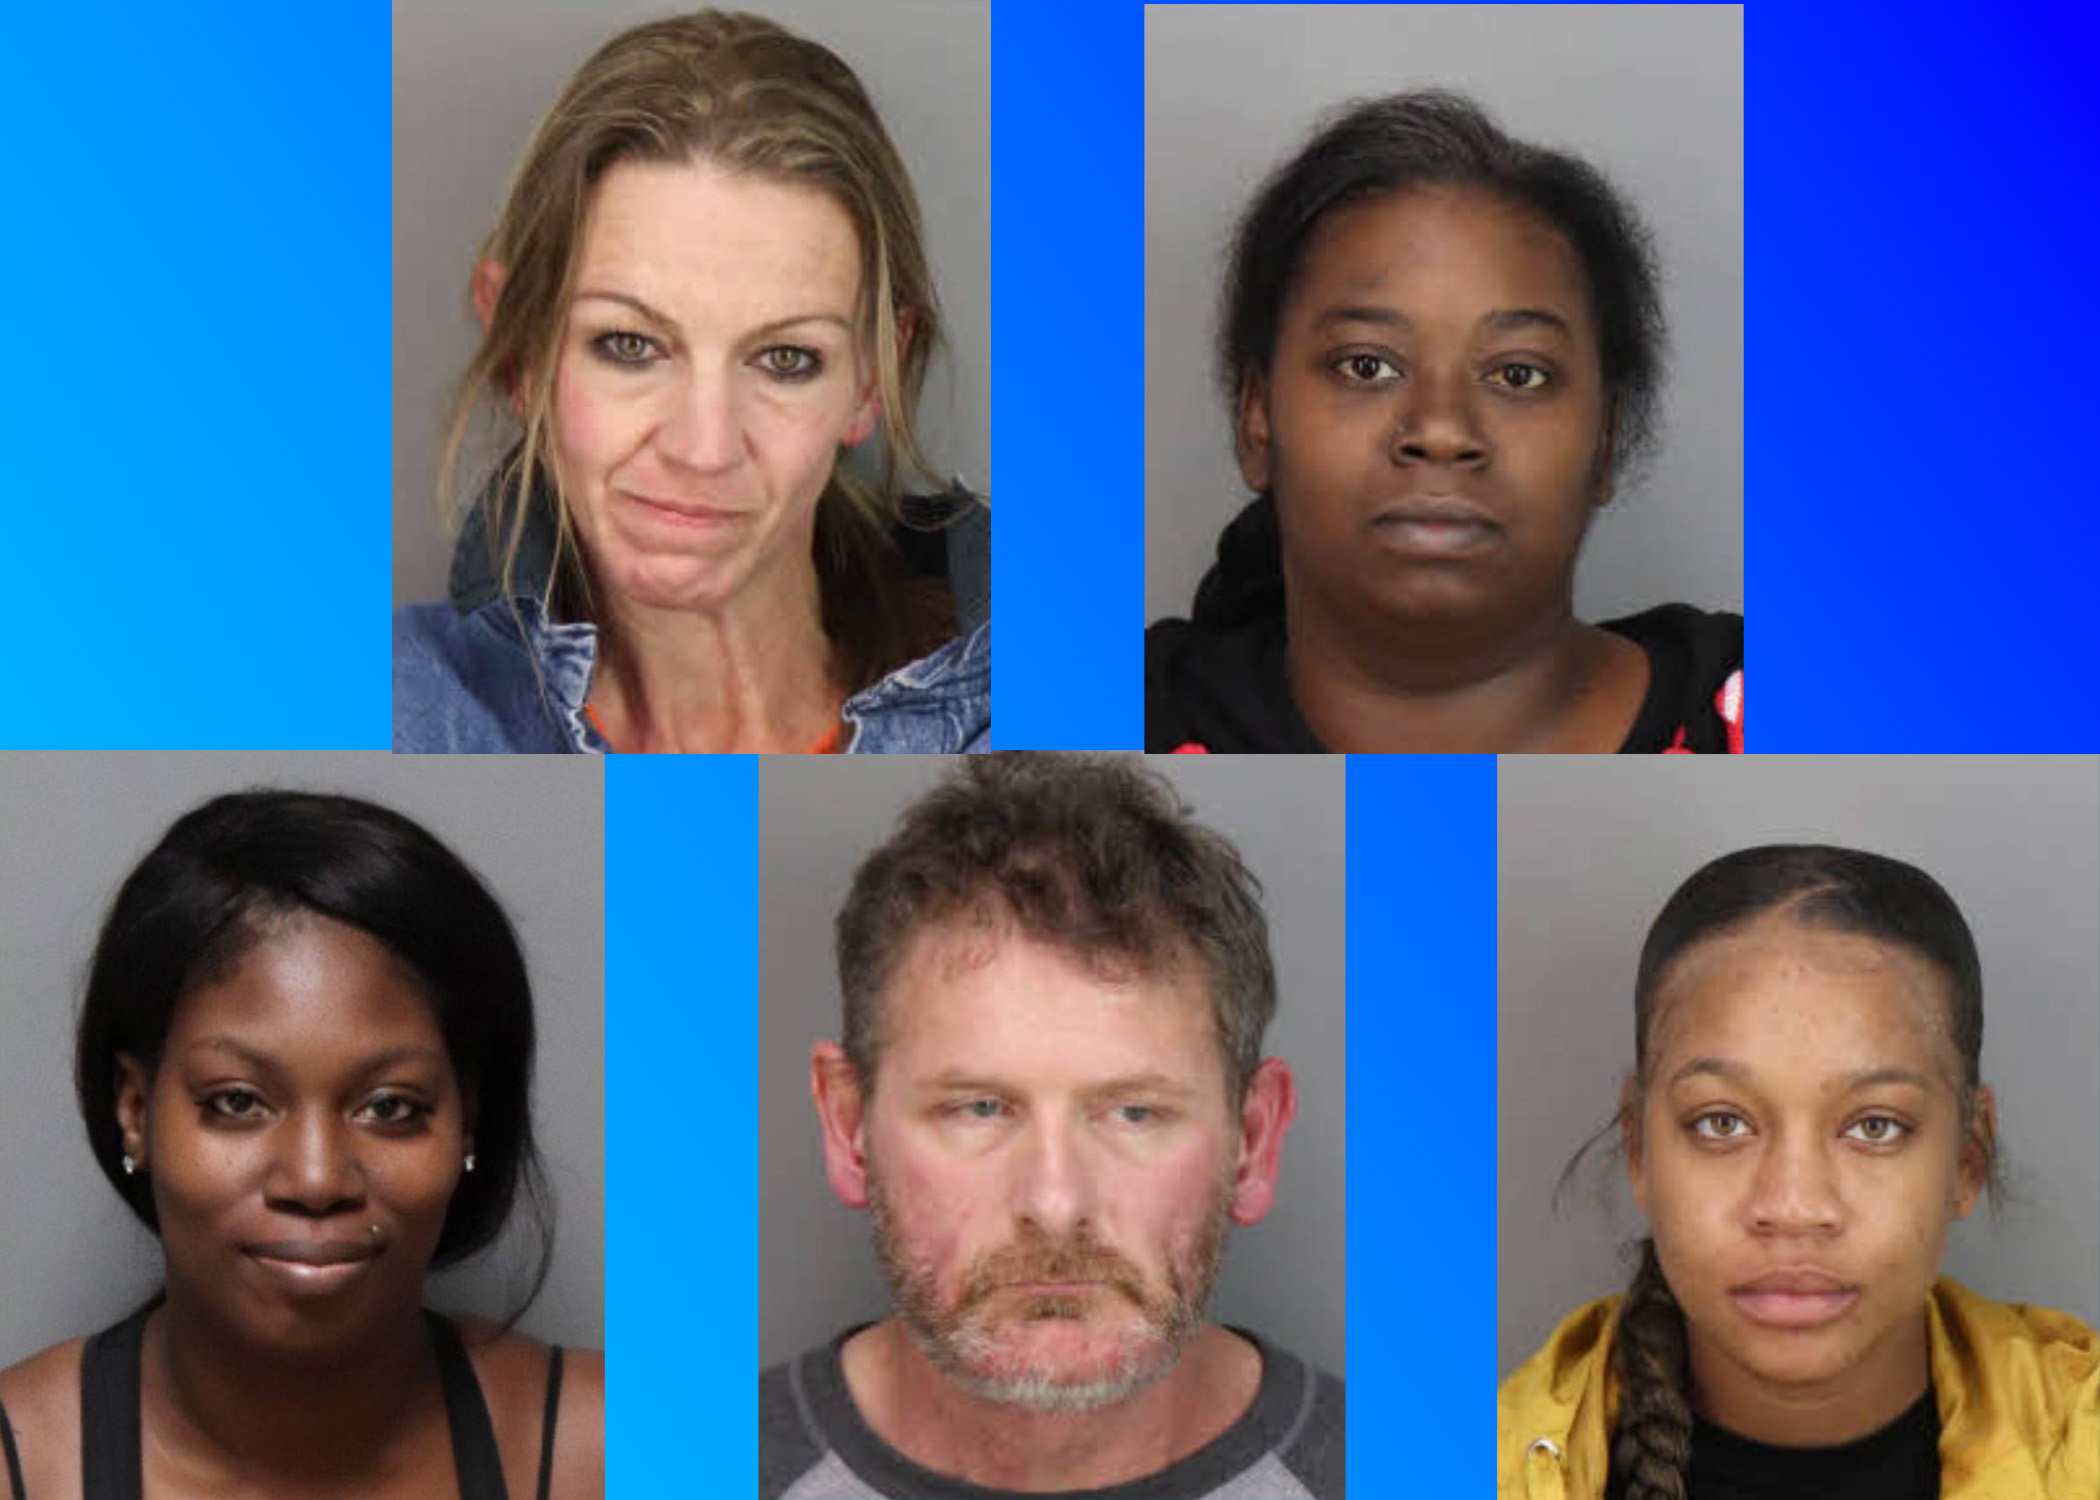 5 arrested for shoplifting in Trussville